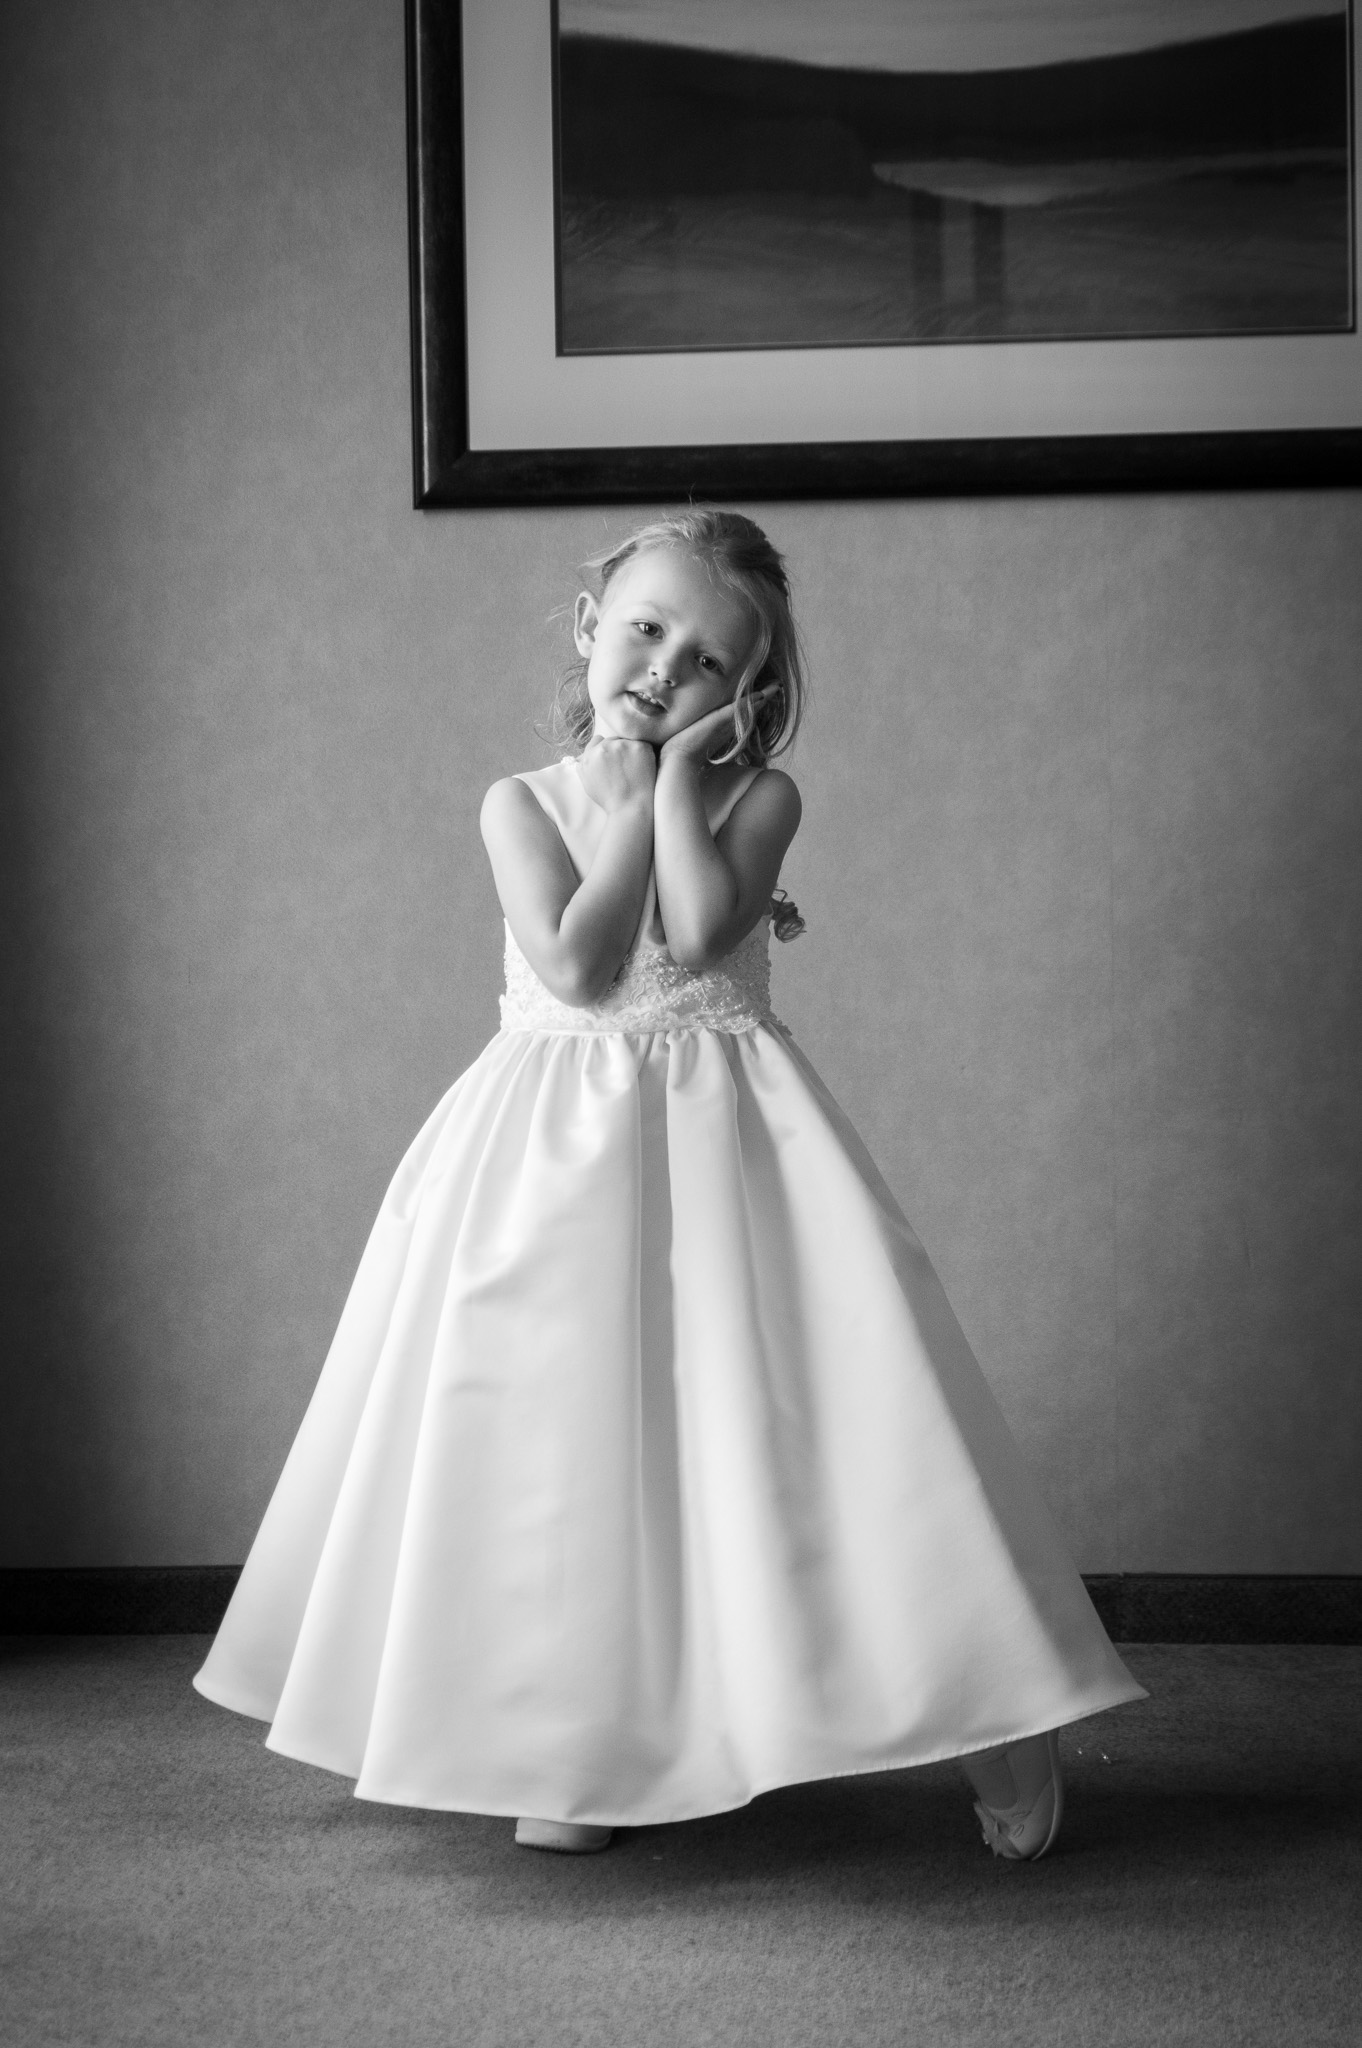 Flower girl looking at camera in black and white